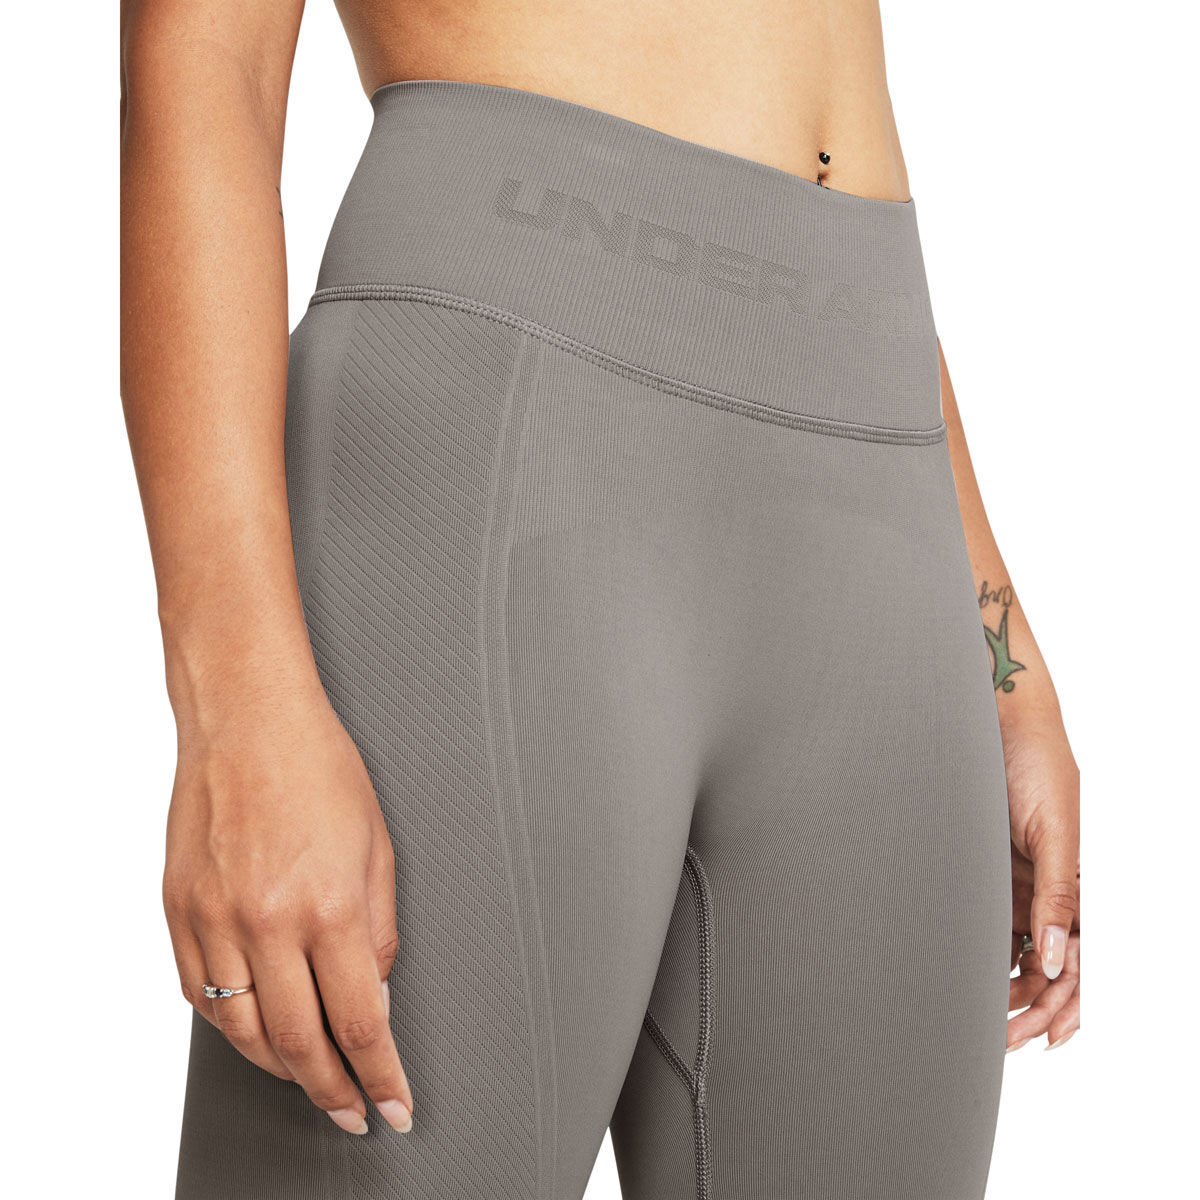 Under Armour Womens Train Seamless Full Length Tights, Grey, rebel_hi-res